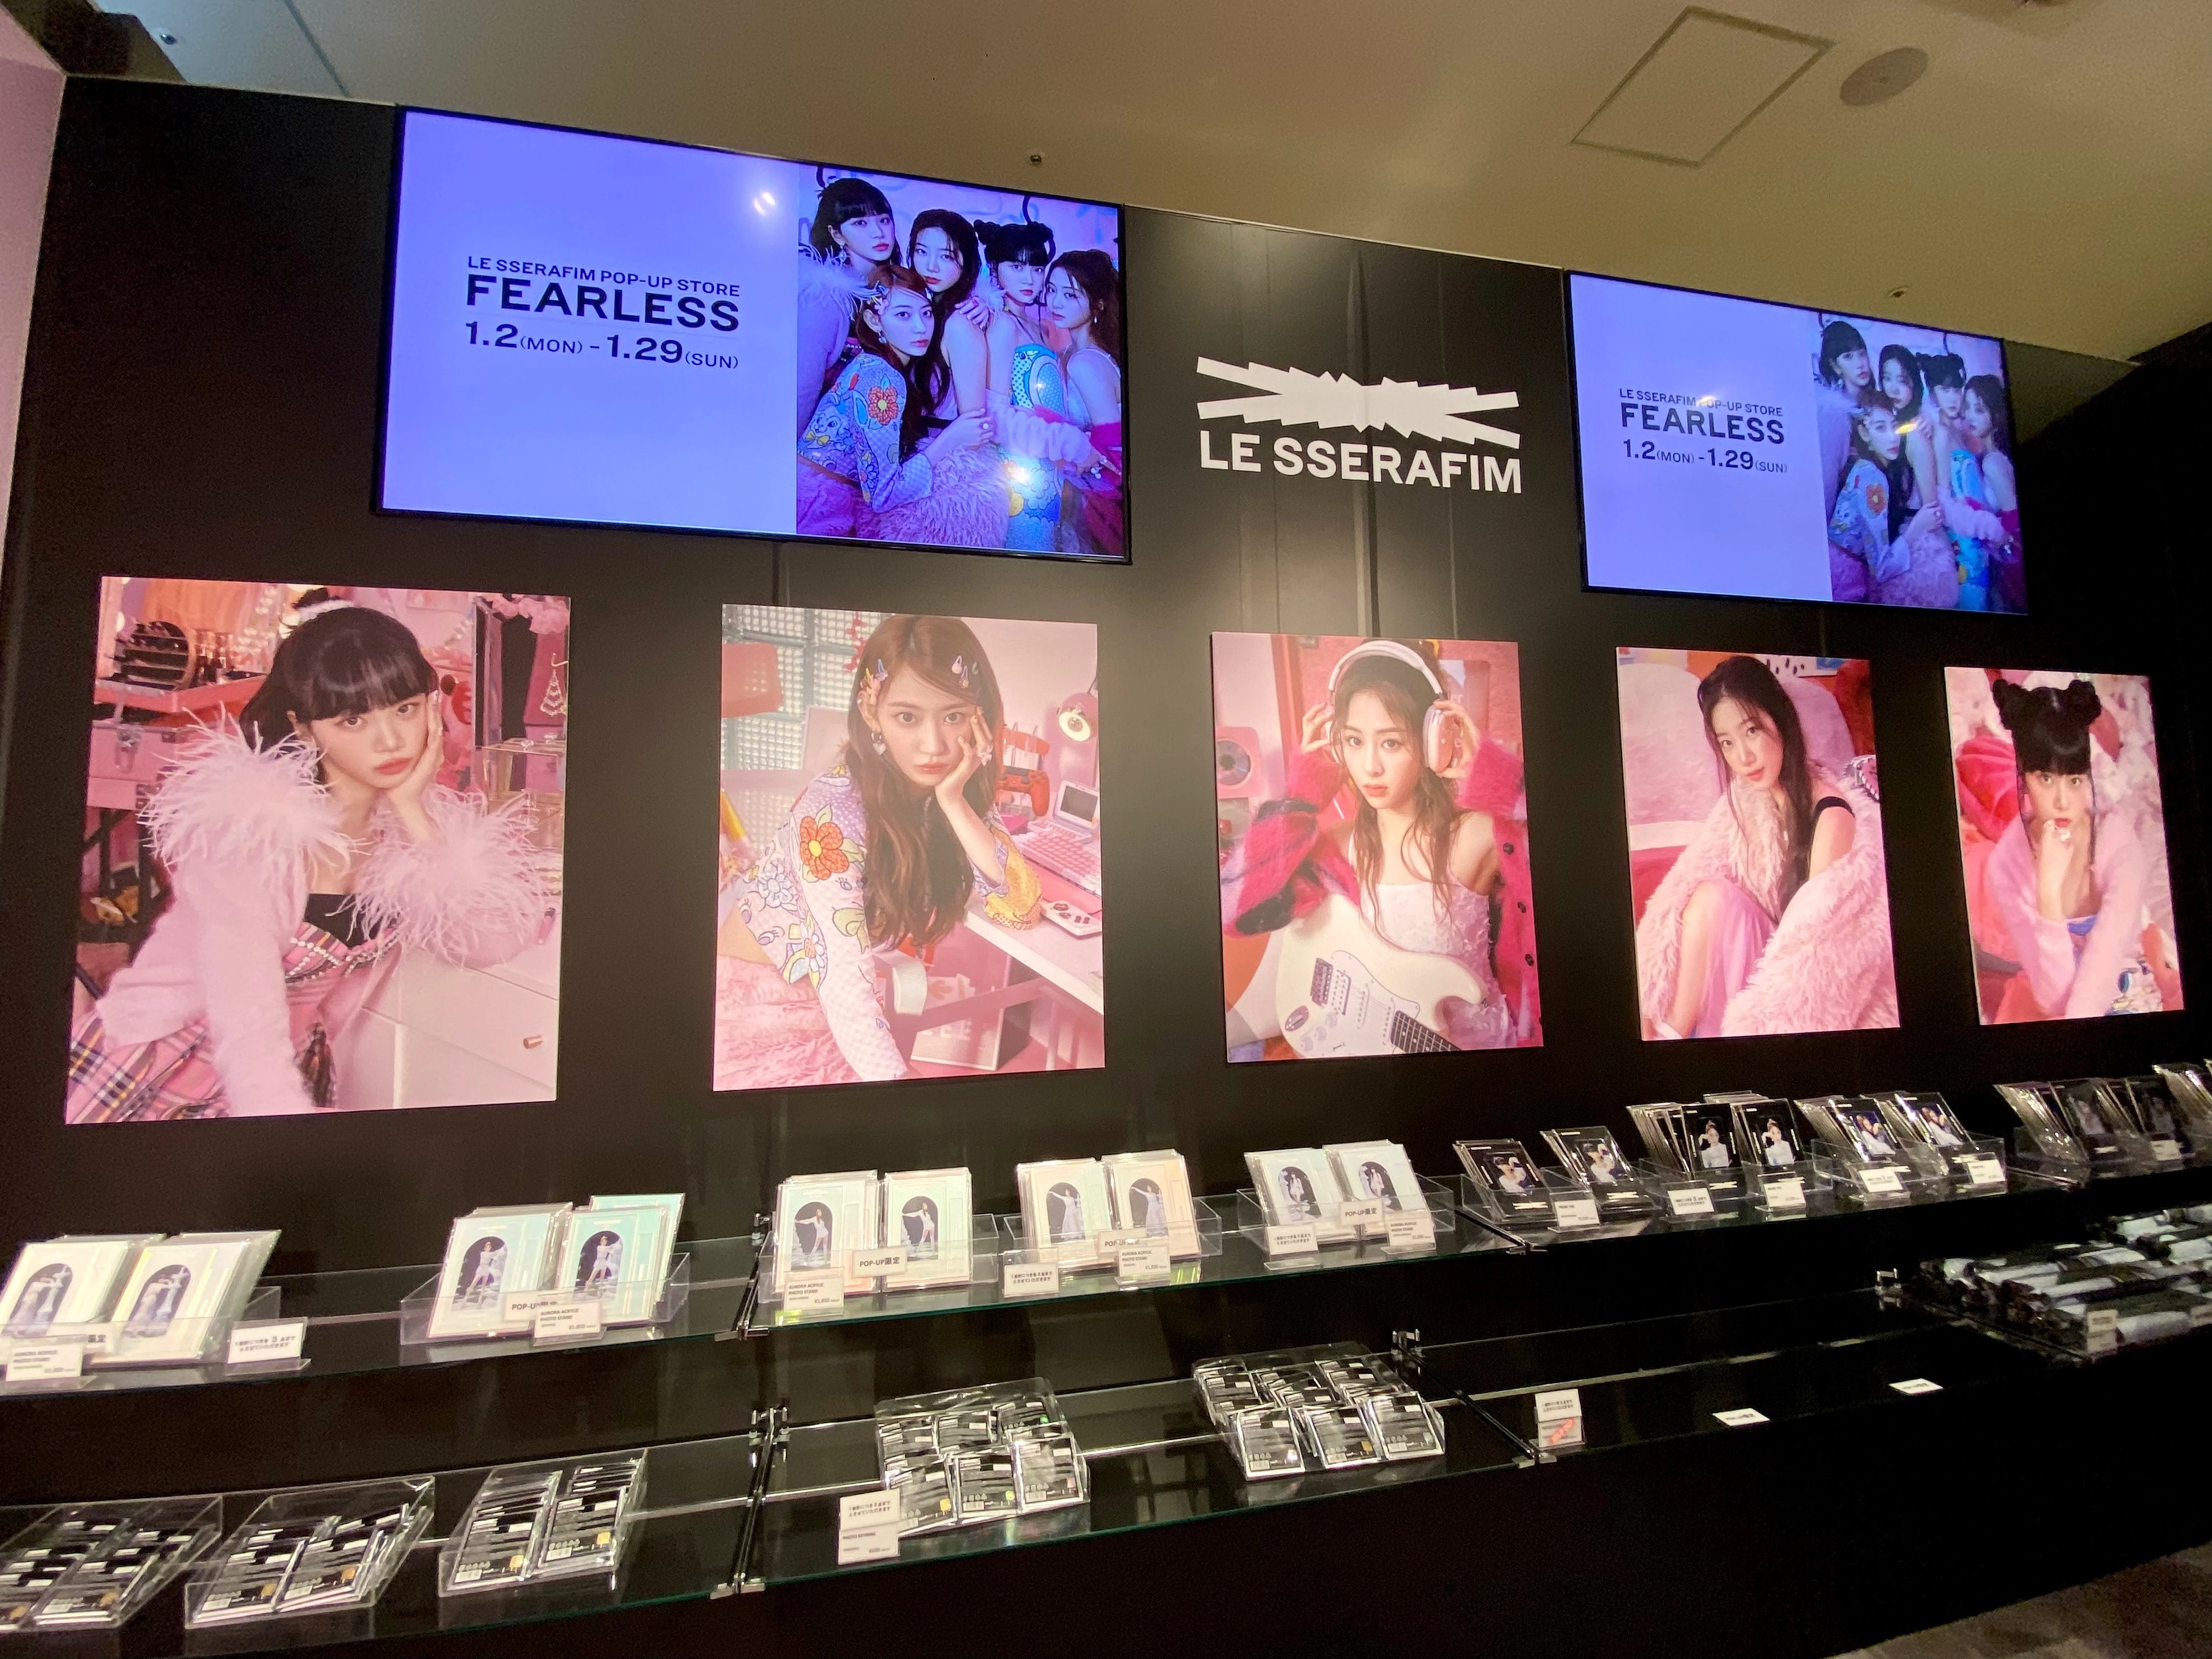 LE SSERAFIM POP-UP STORE ‘FEARLESS’　店内　様子　ルセラフィム  大阪